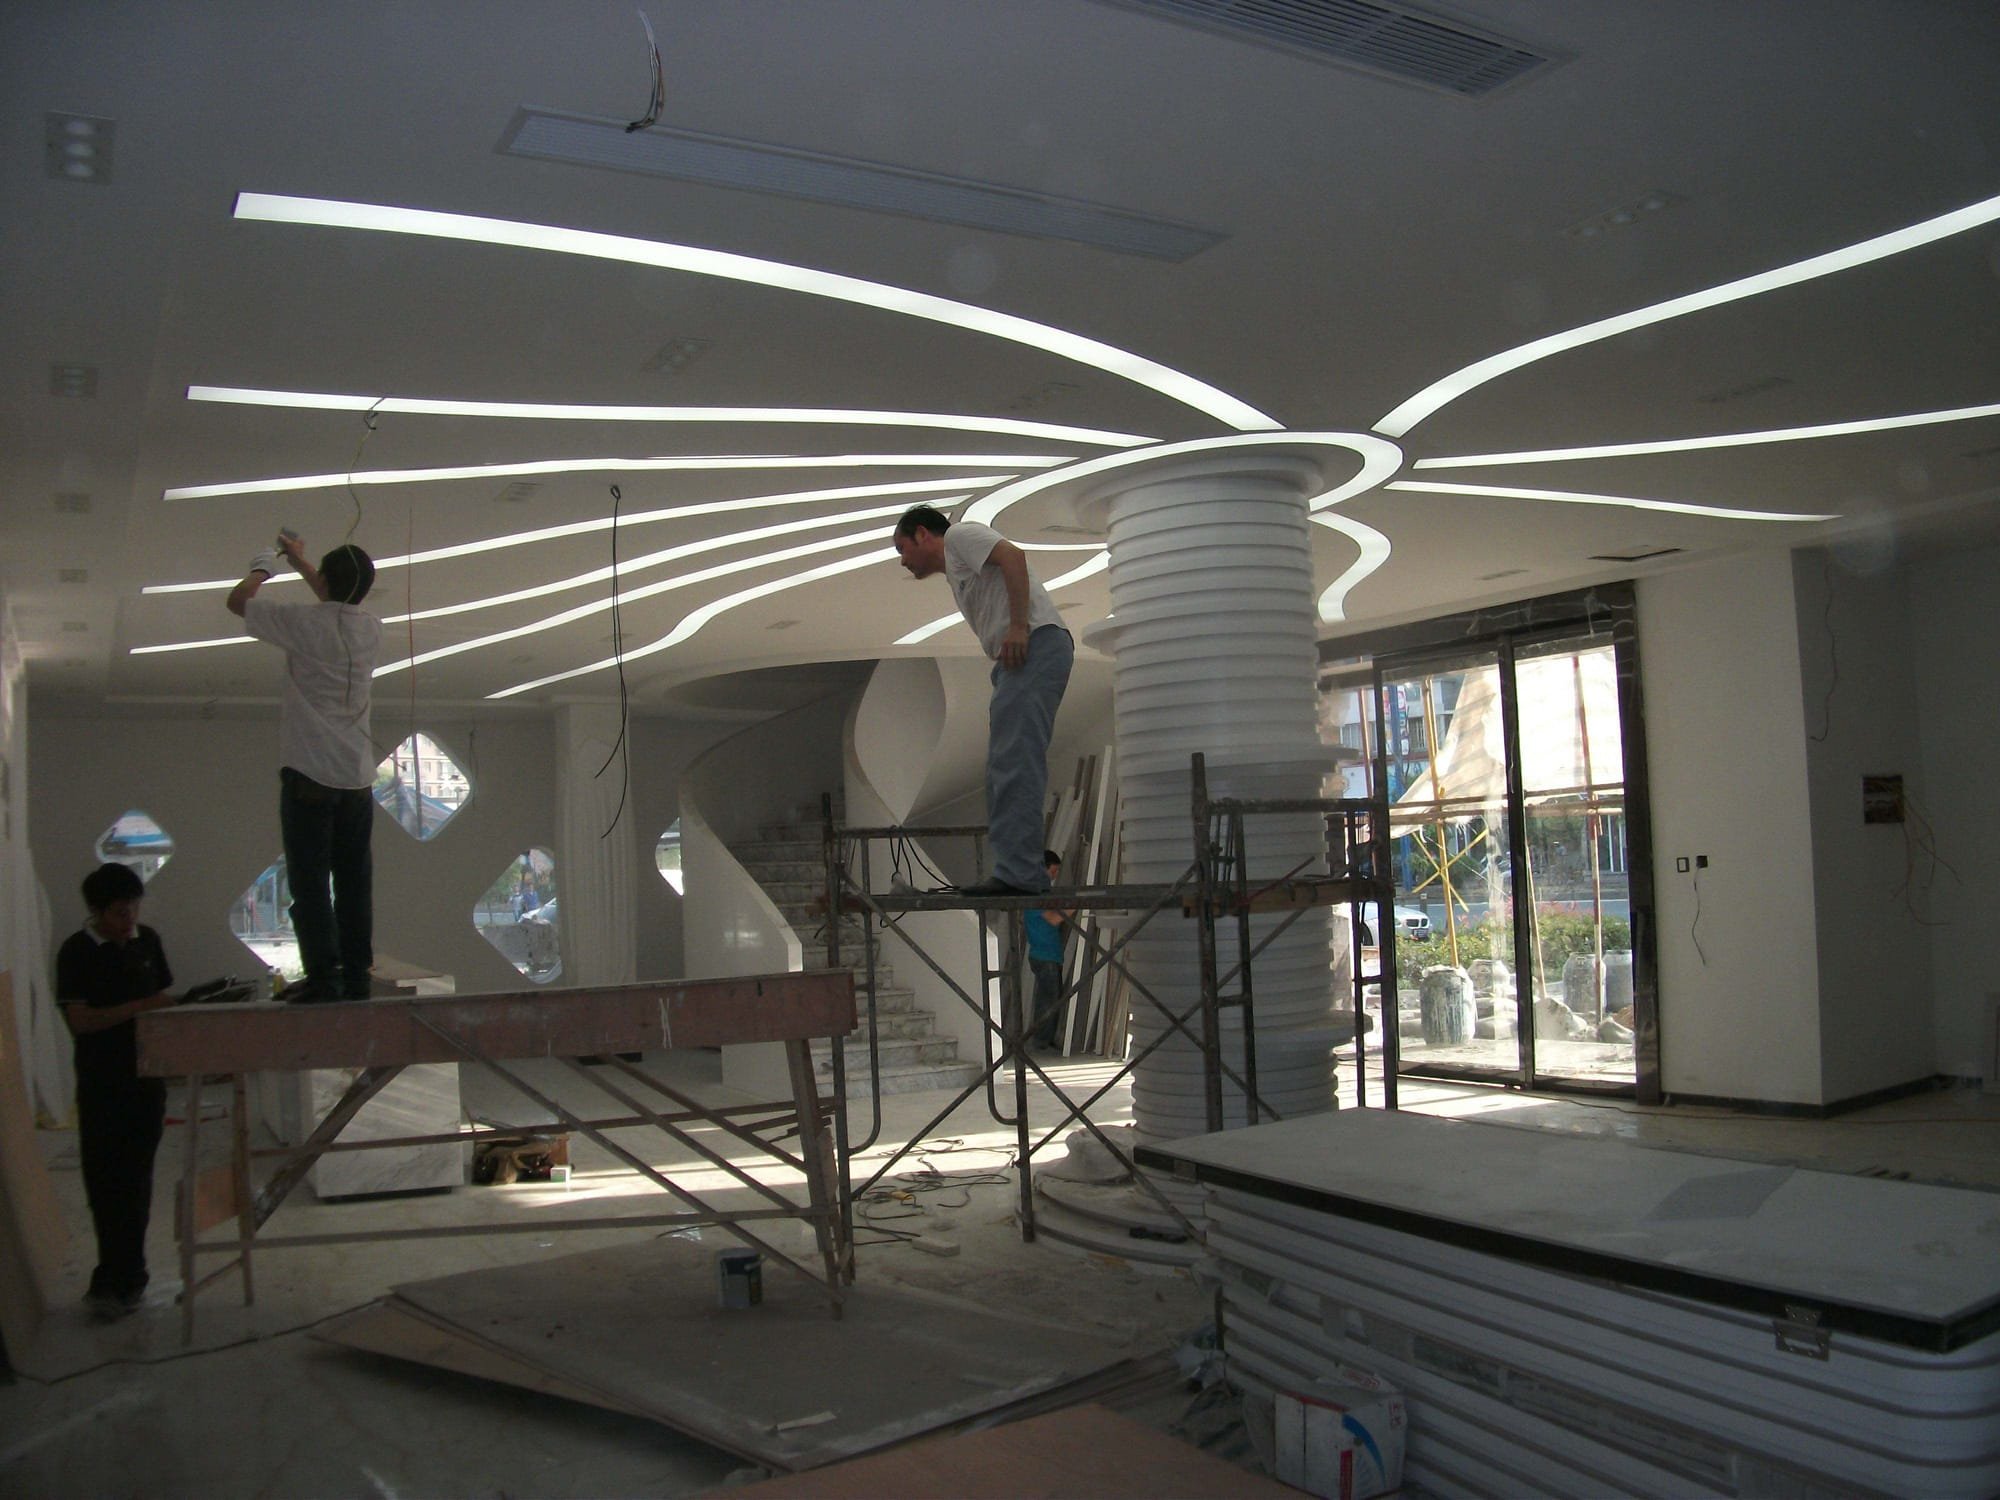 The Excellent performance of uv print pvc stretch ceiling film Foxygen